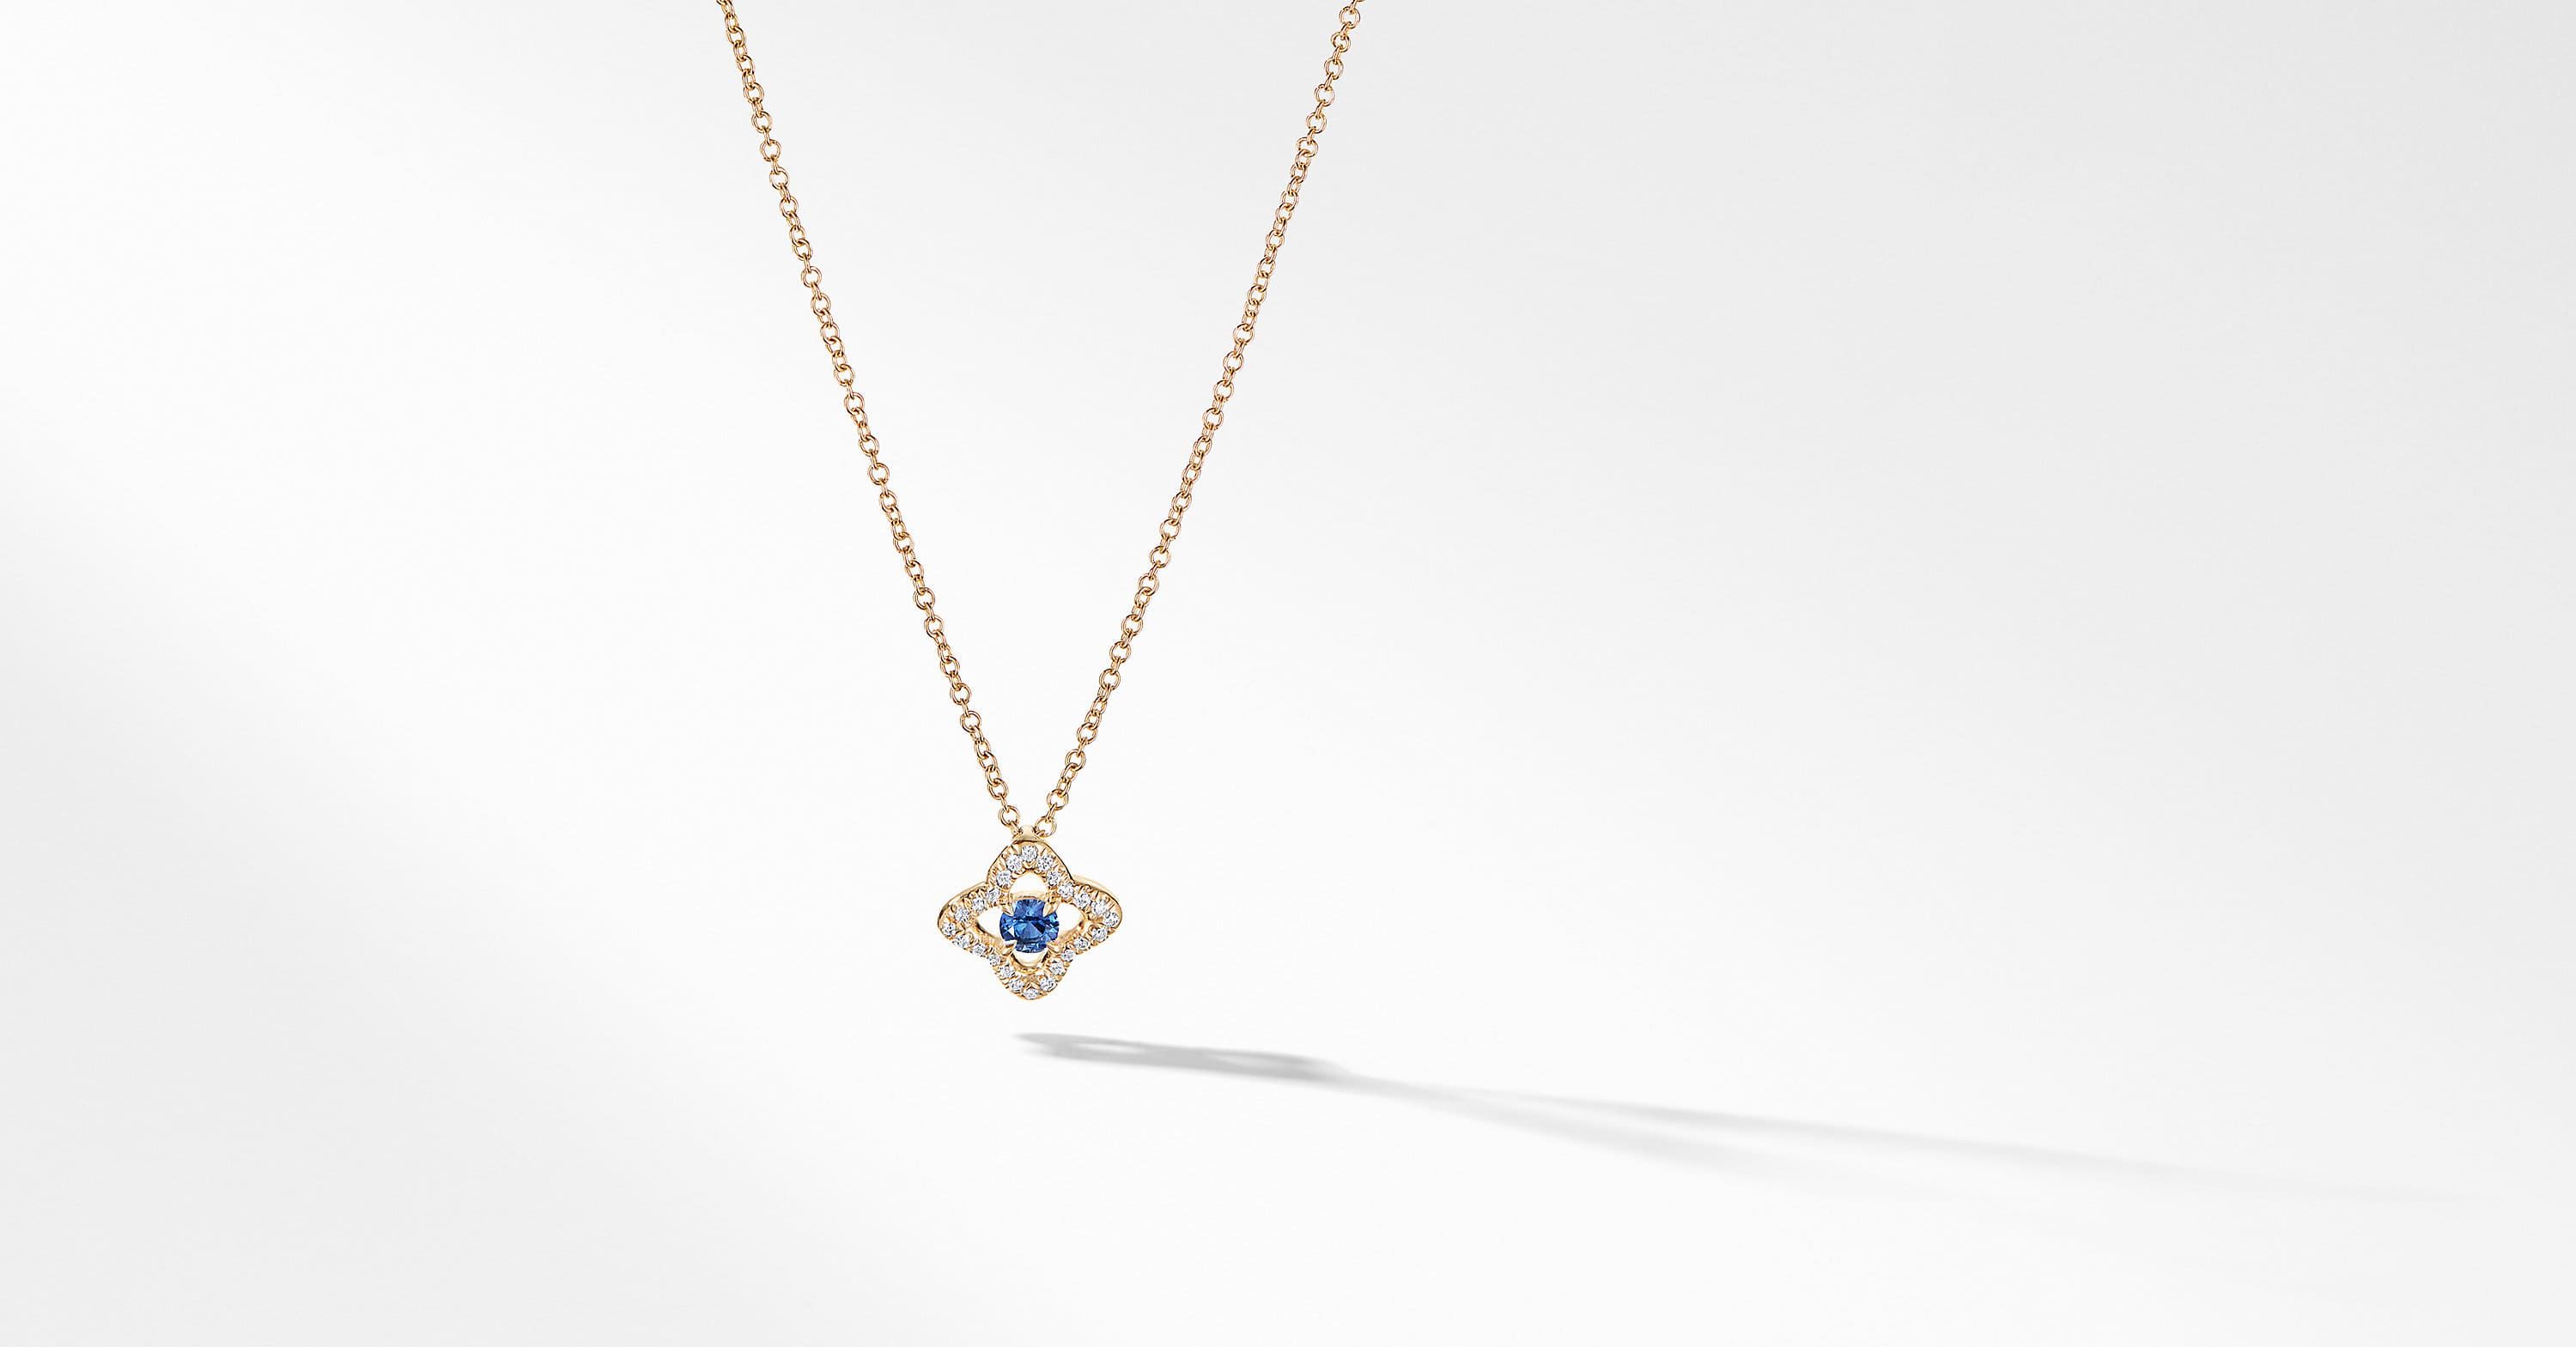 Venetian Quatrefoil® Necklace with Blue Sapphire and Diamonds in 18K Gold